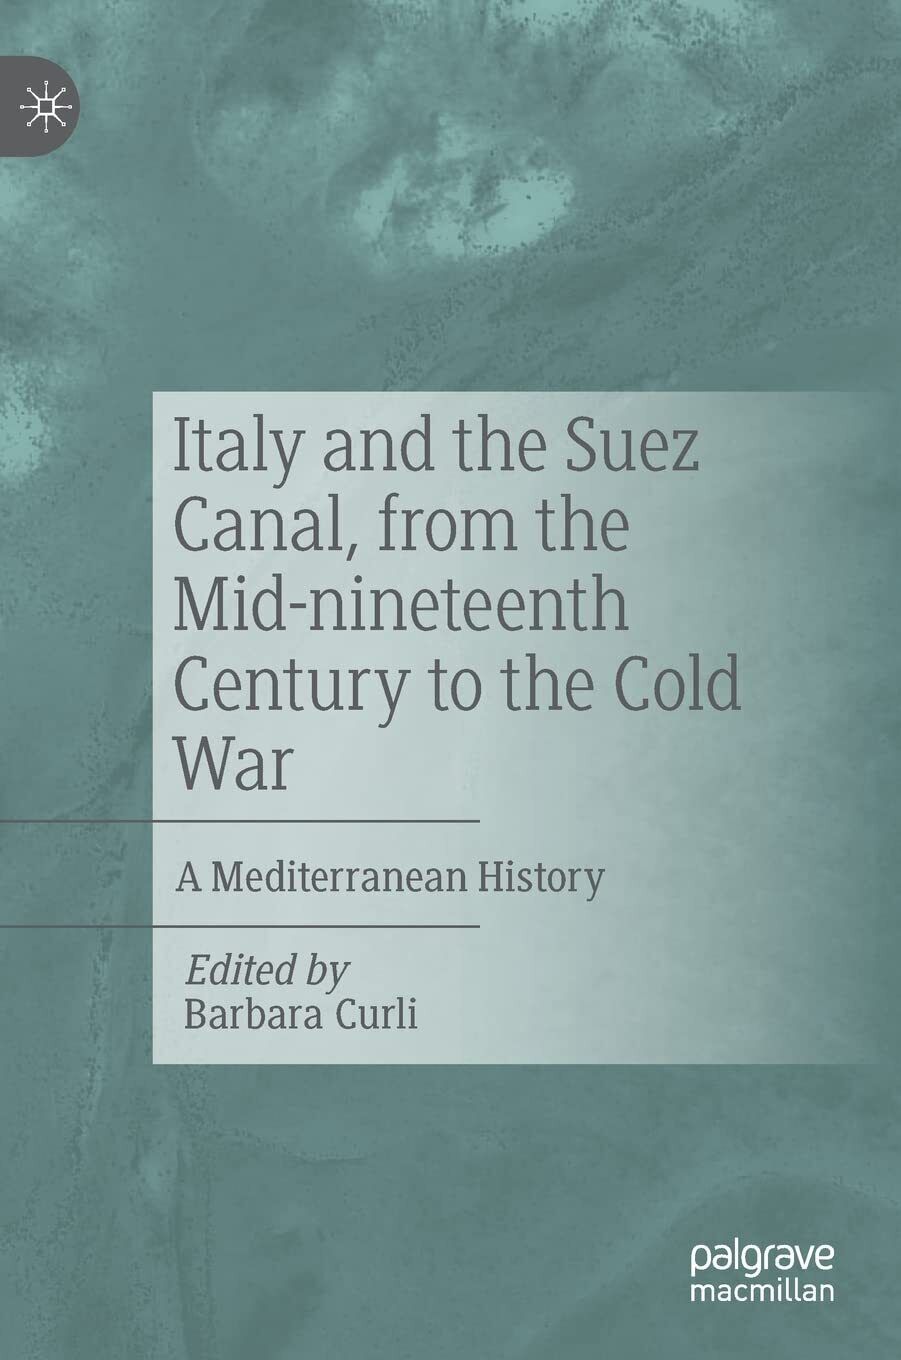 Italy and the Suez Canal, from the Mid-nineteenth Century to the Cold War - 2022